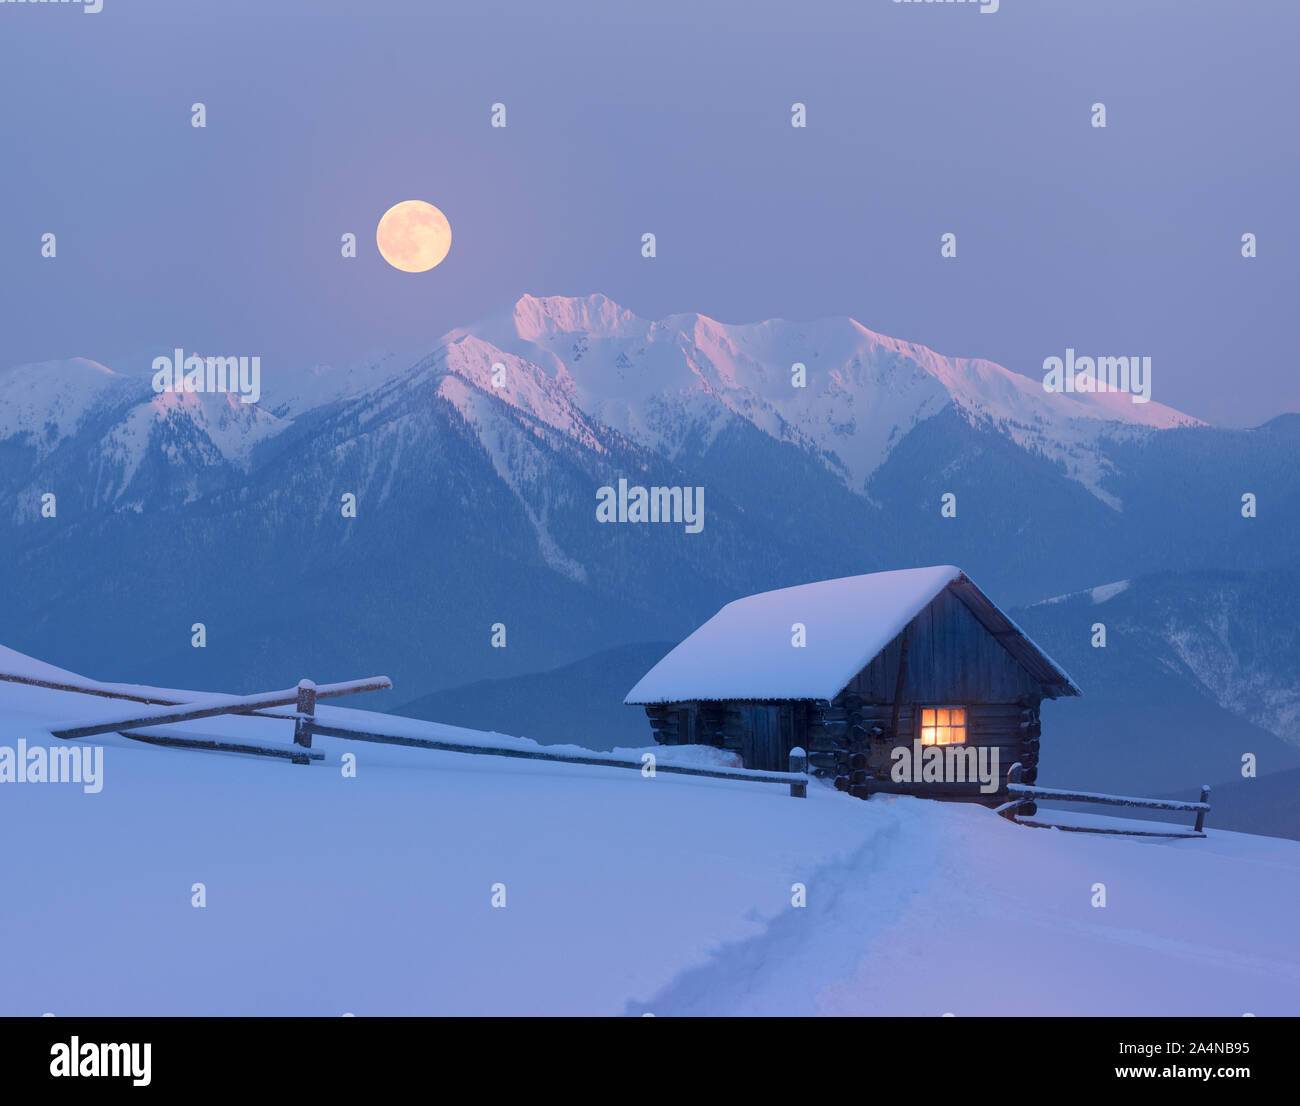 Christmas landscape with a snowy house in the mountains. Fairy night view with full moon. Winter wonderland with footsteps in snow Stock Photo